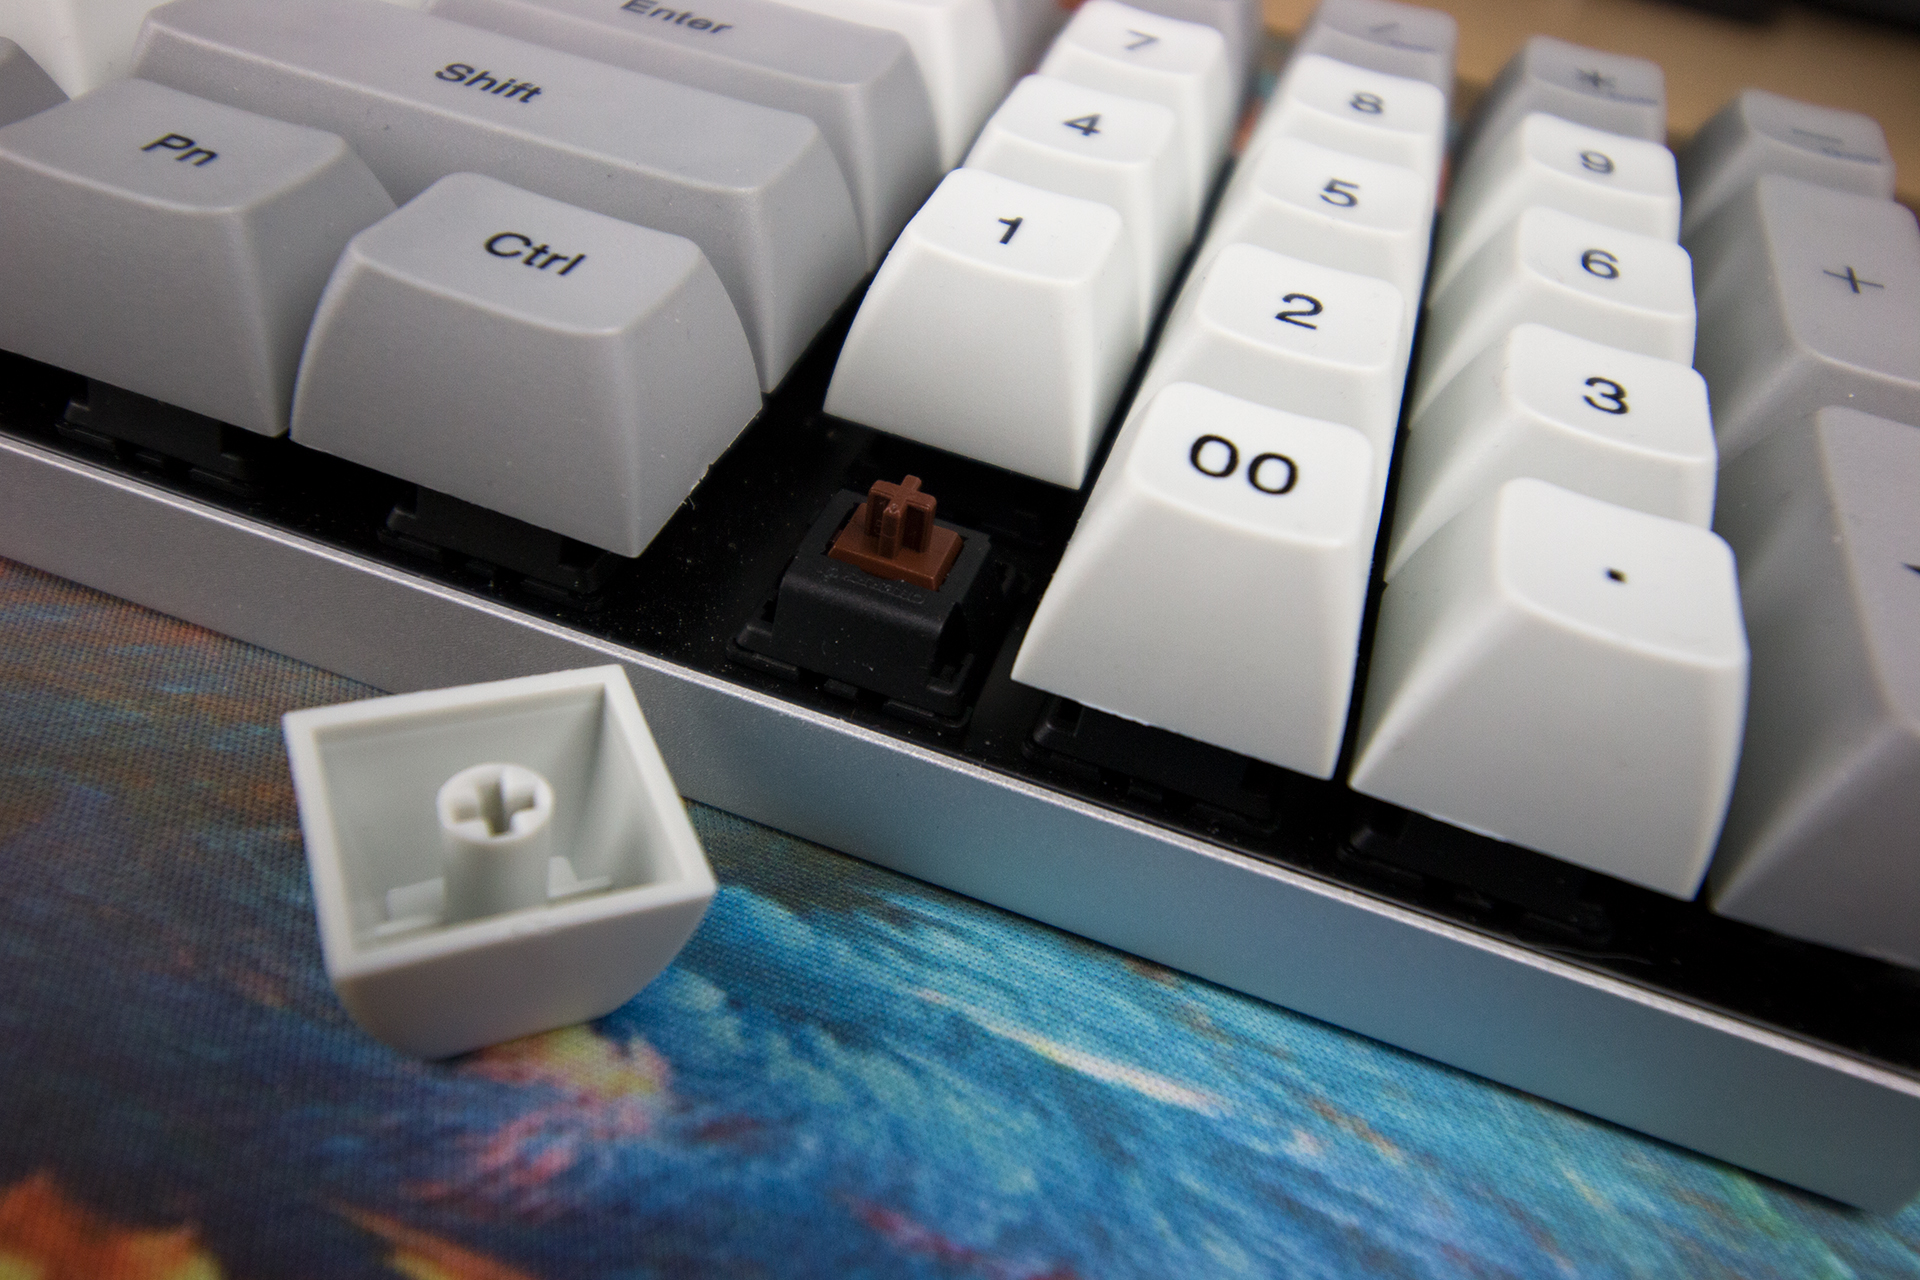 Vortex Vibe Keyboard Review: Smaller By The Numbers